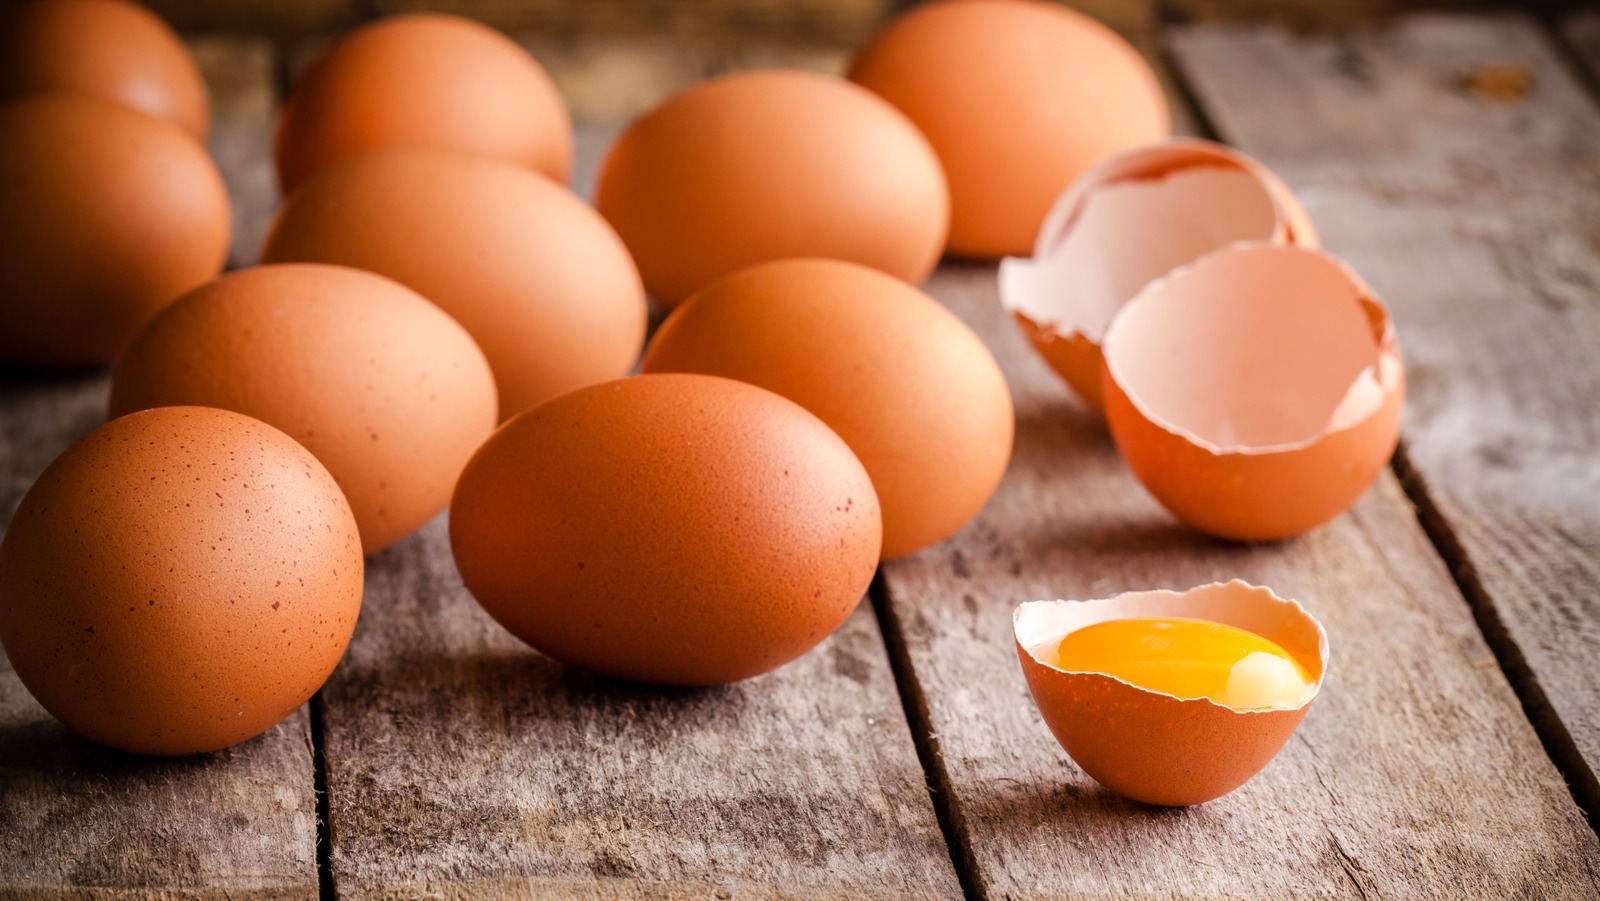 Is It Safe To Eat Eggs With Blood Spots?